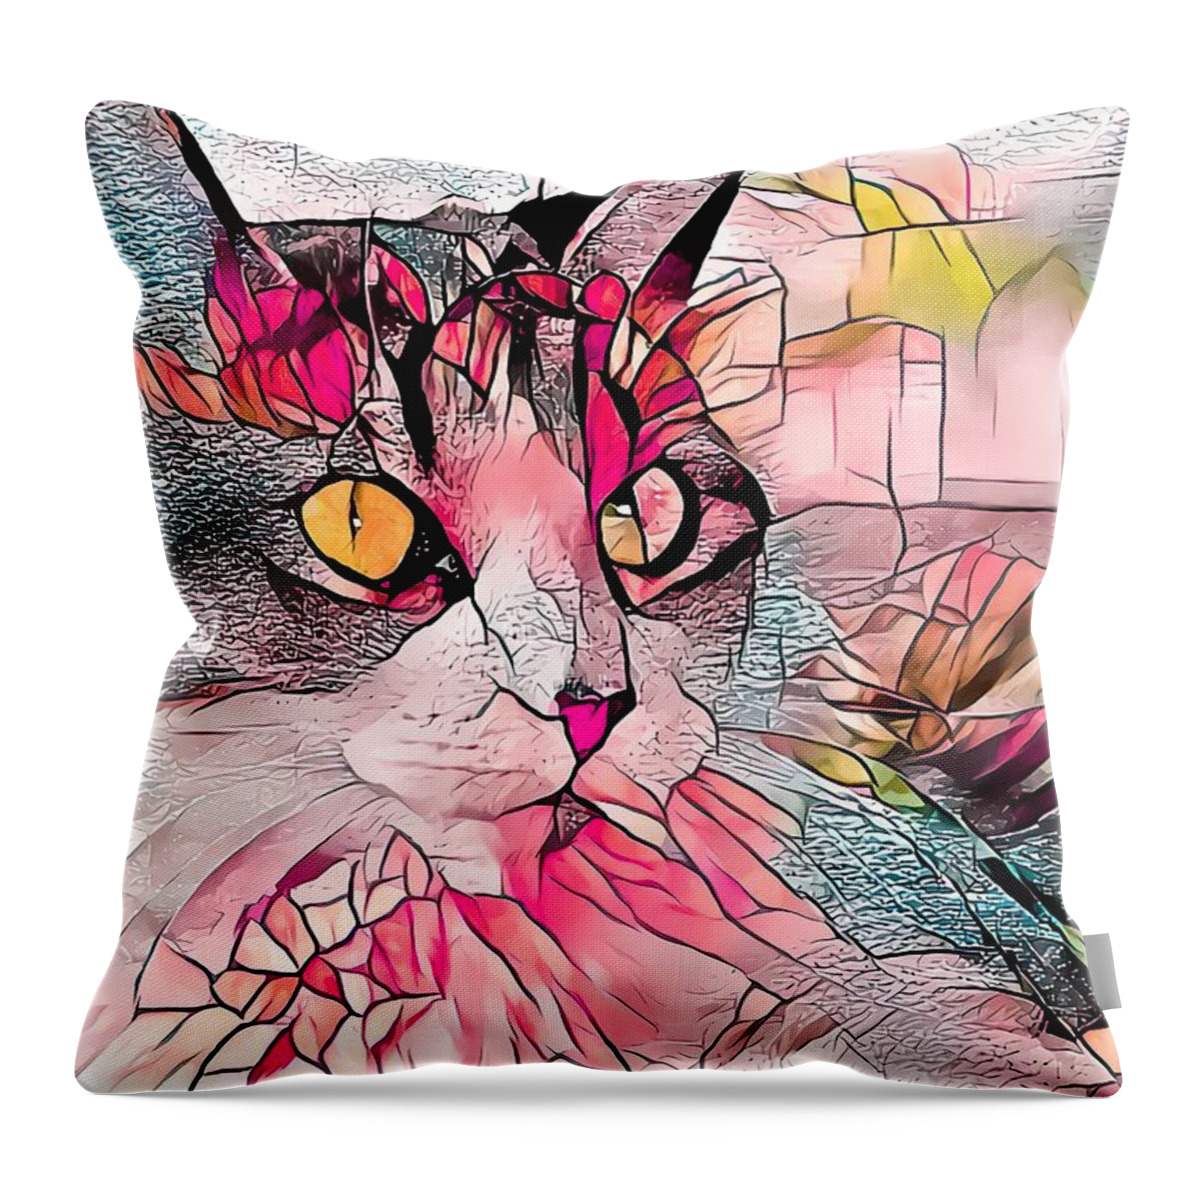 Glass Throw Pillow featuring the digital art Stained Glass Cat Profile Warm Colors by Don Northup